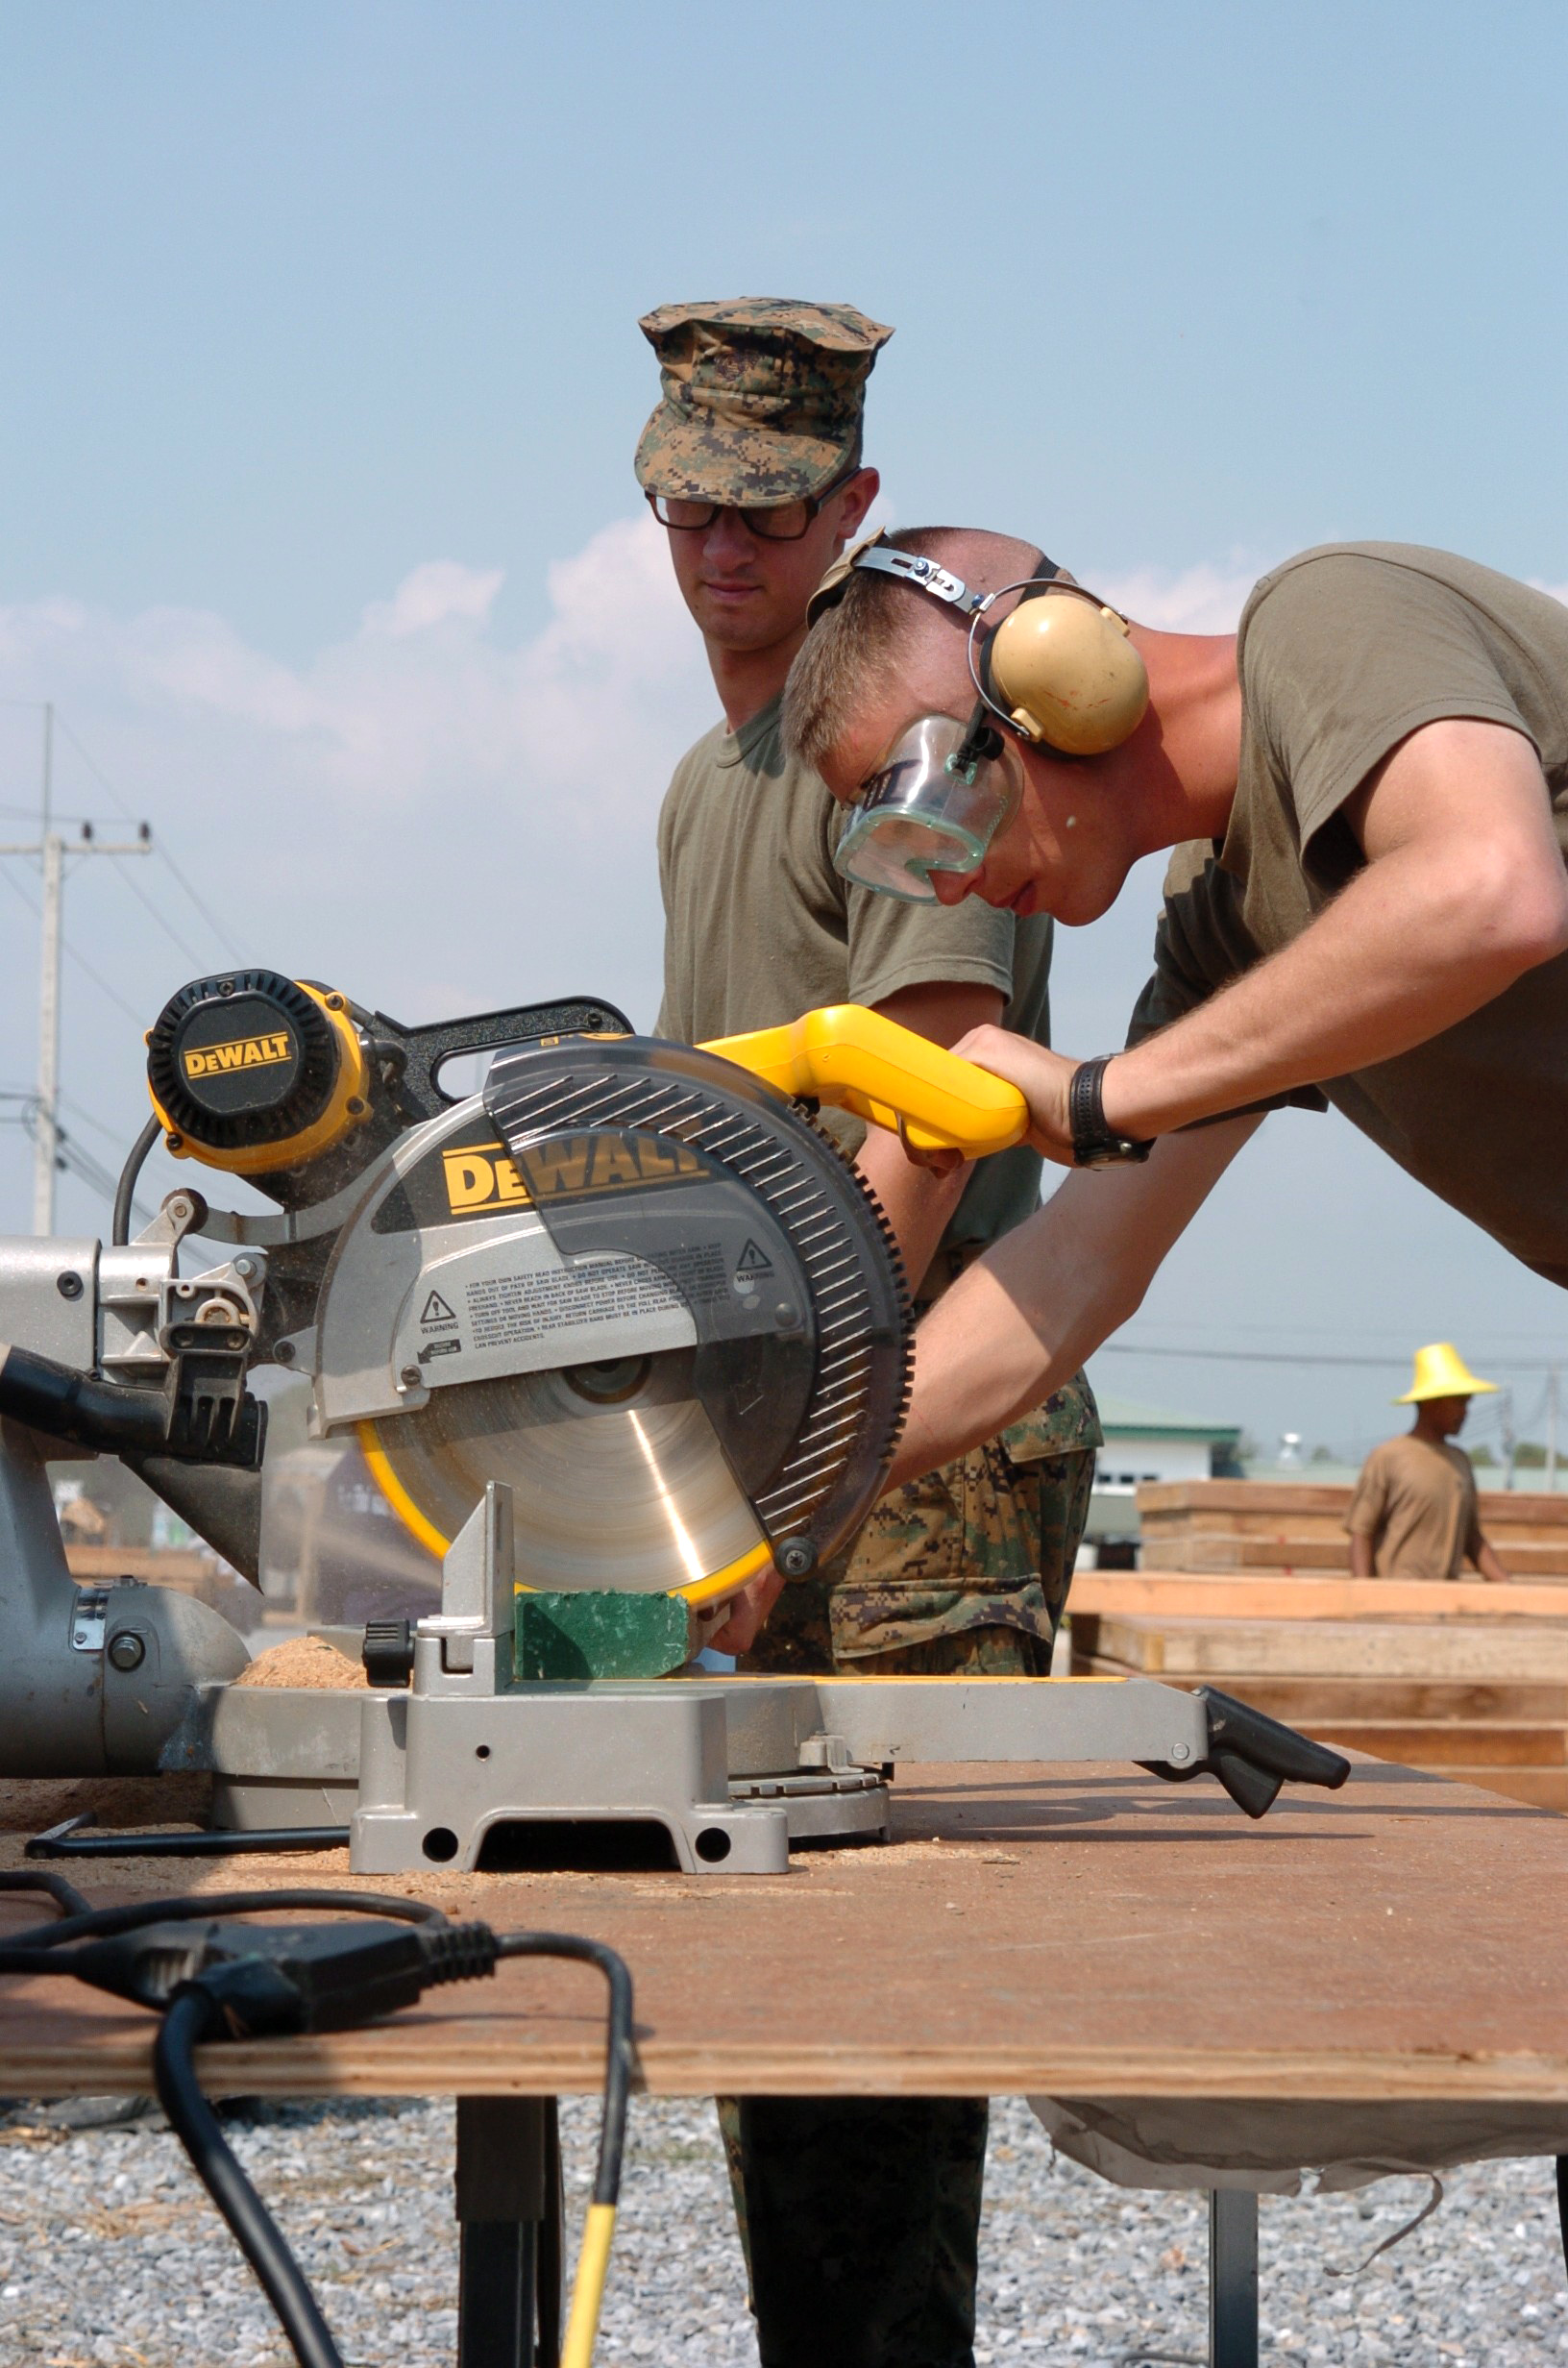 US Navy 050111-M-3295H-006 Lance Cpl. Kevin Shepard, foreground, and Pfc. Anthony Nichols, both assigned to the 3rd Marine Expeditionary Force (MEF), use a radial saw to cut plywood